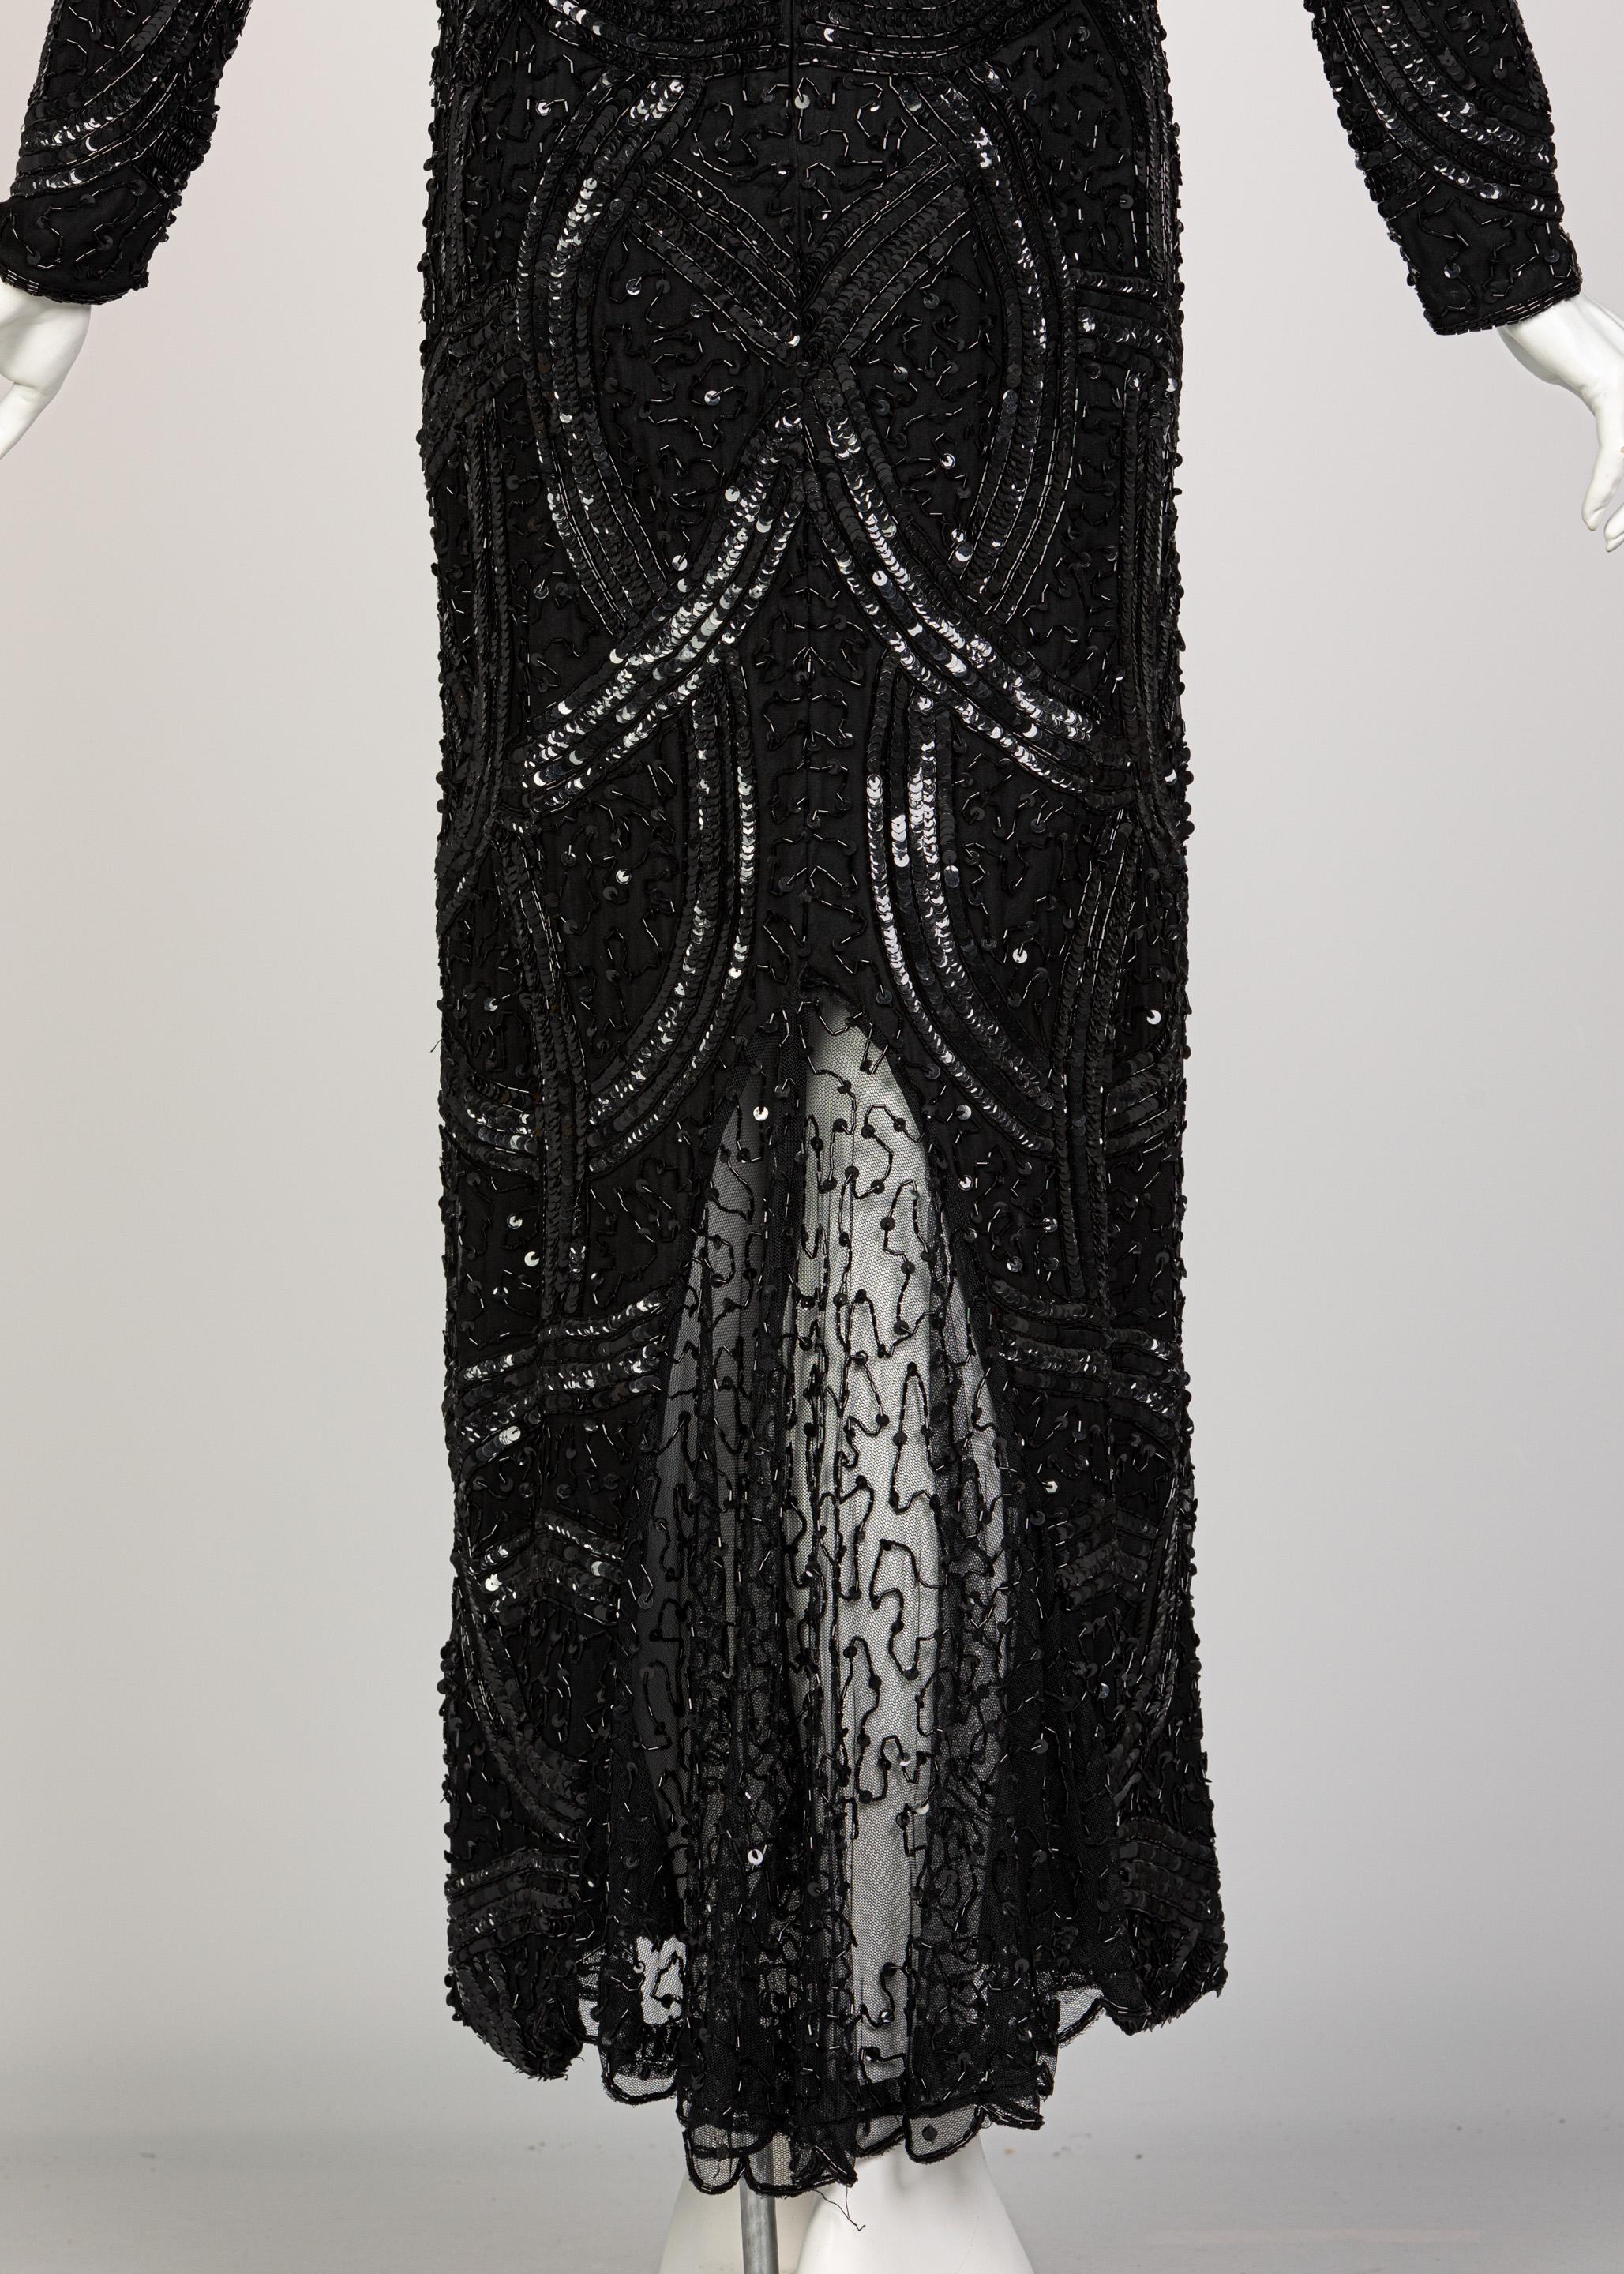 Men's Bob Mackie Attributed Black Beaded Sequins Dress, 1980s For Sale